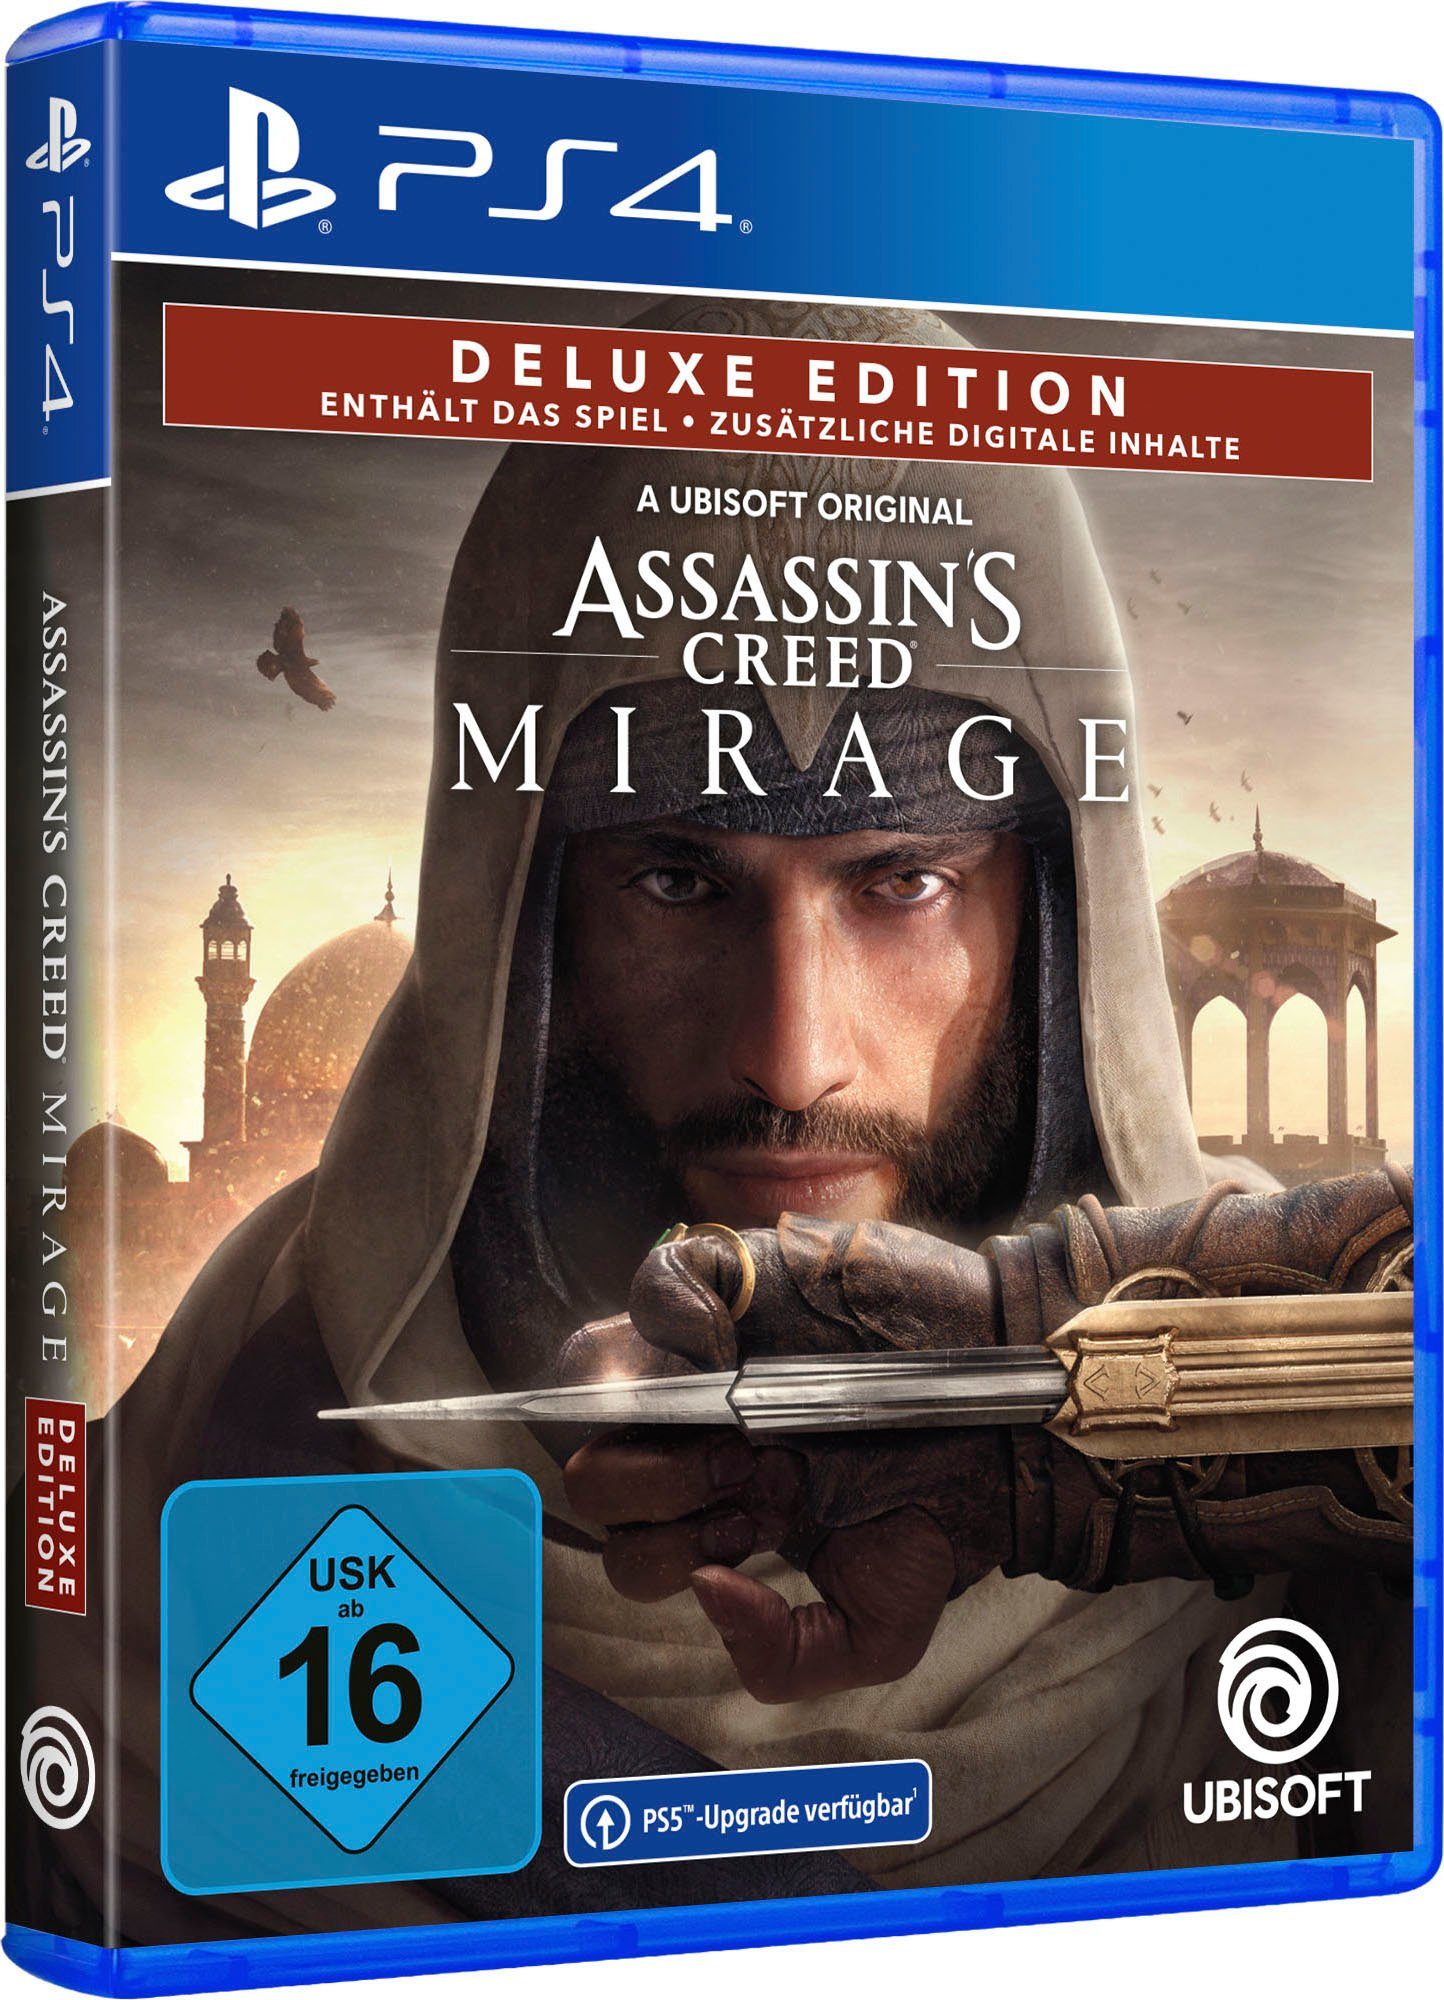 Edition Creed Deluxe UBISOFT - auf 4 PS5) Upgrade (kostenloses Mirage Assassin's PlayStation